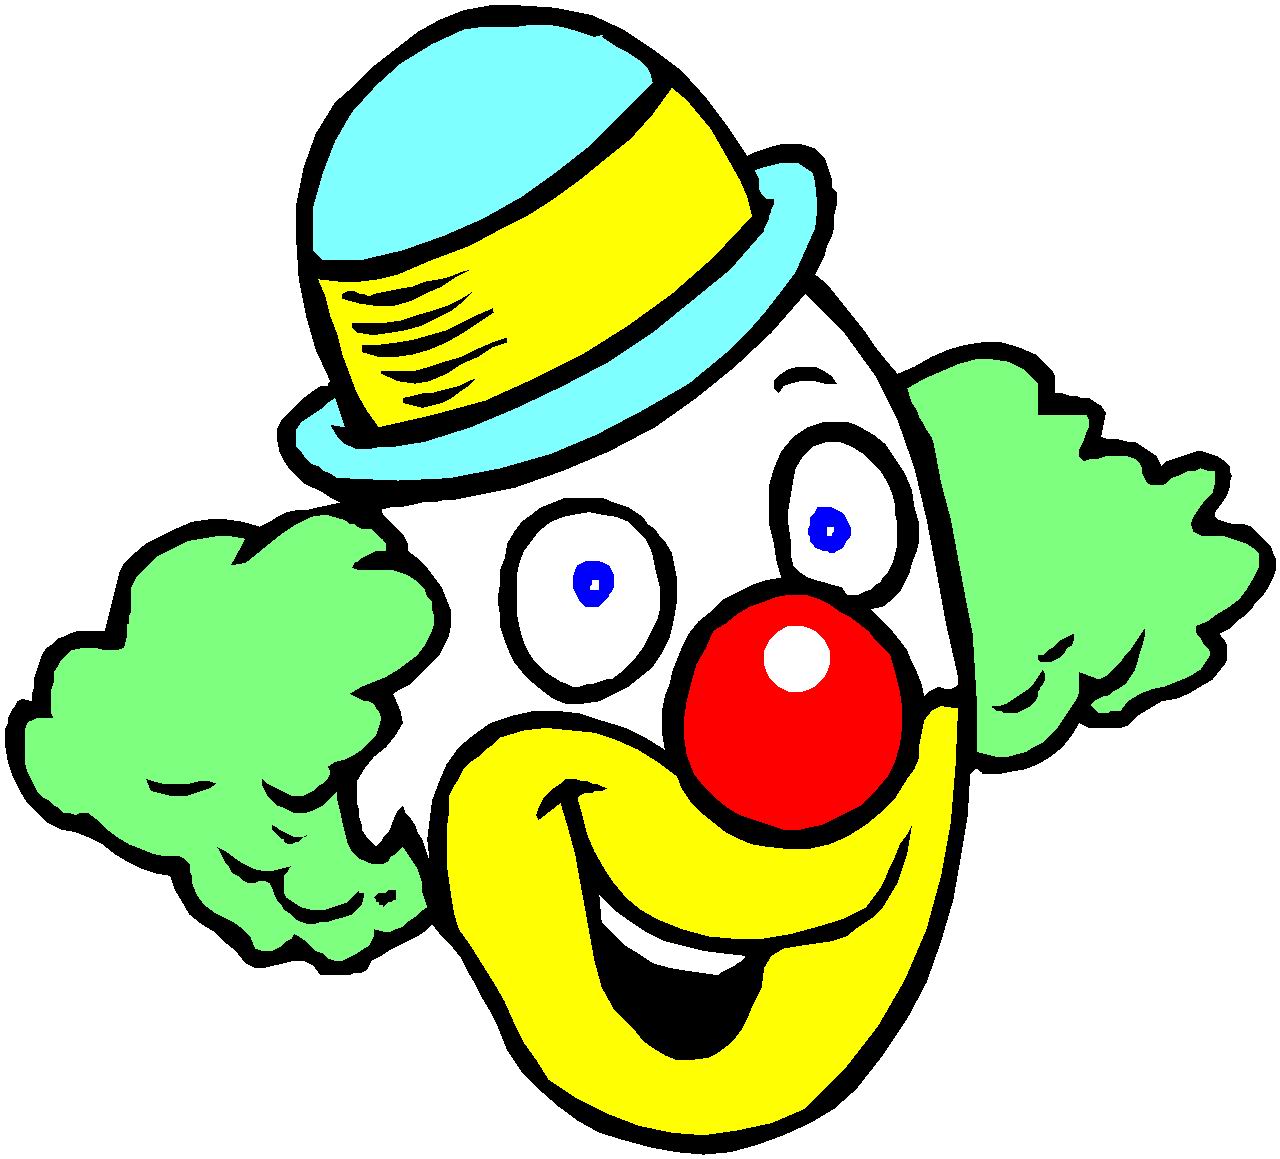 Clown Clipart Black And White | Clipart Panda - Free Clipart Images